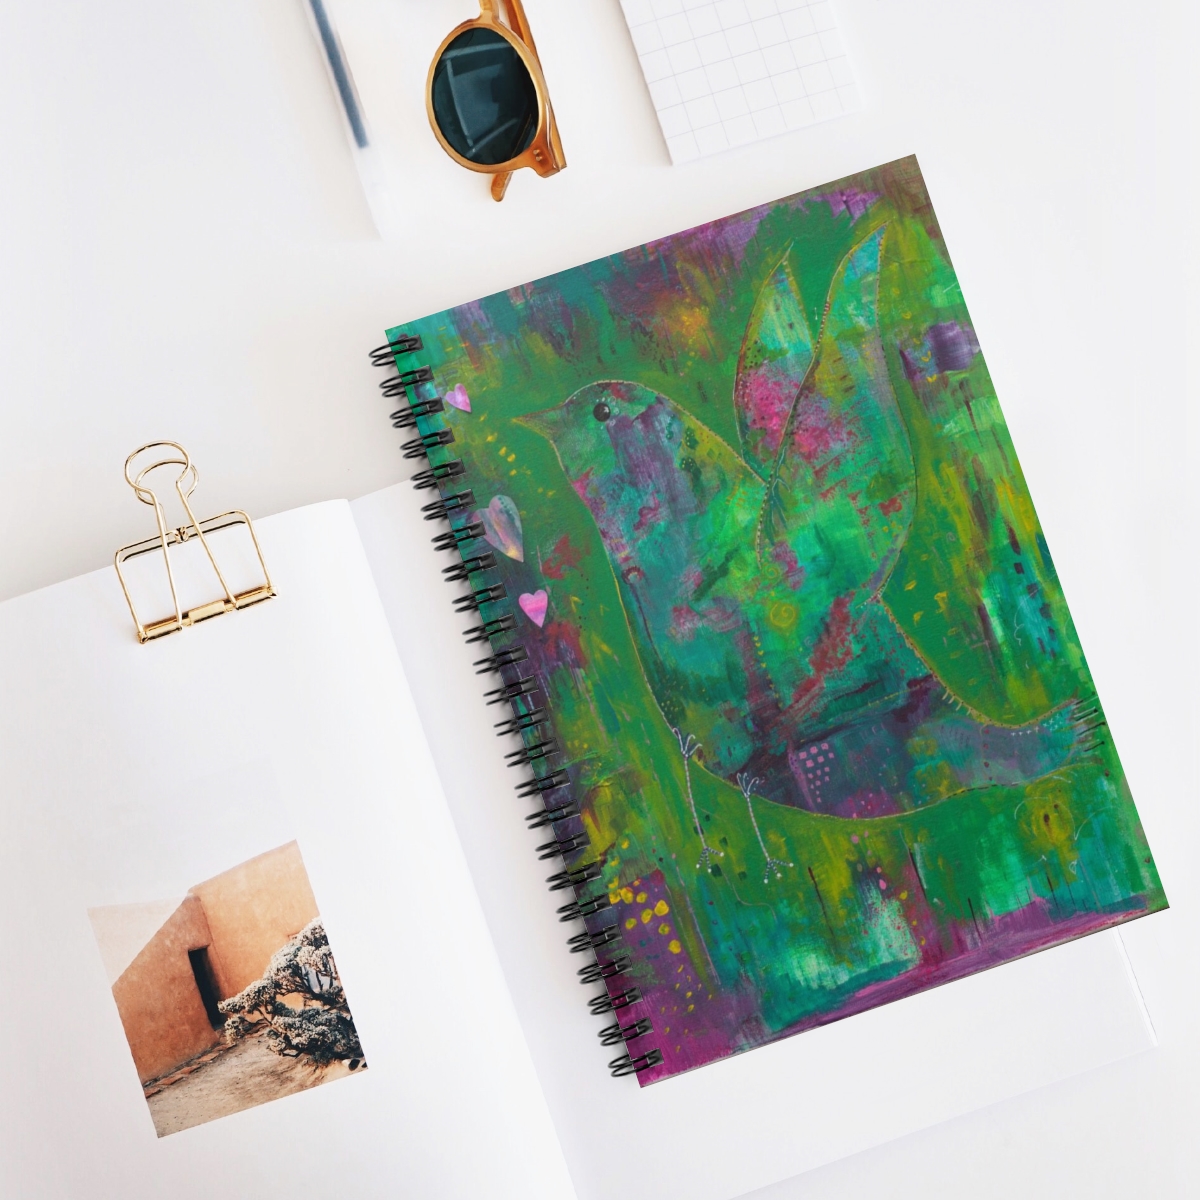 Special whimsical bird Journal in context Whimsical abstract bird taking flight created using layers of green and purple acrylic paints.